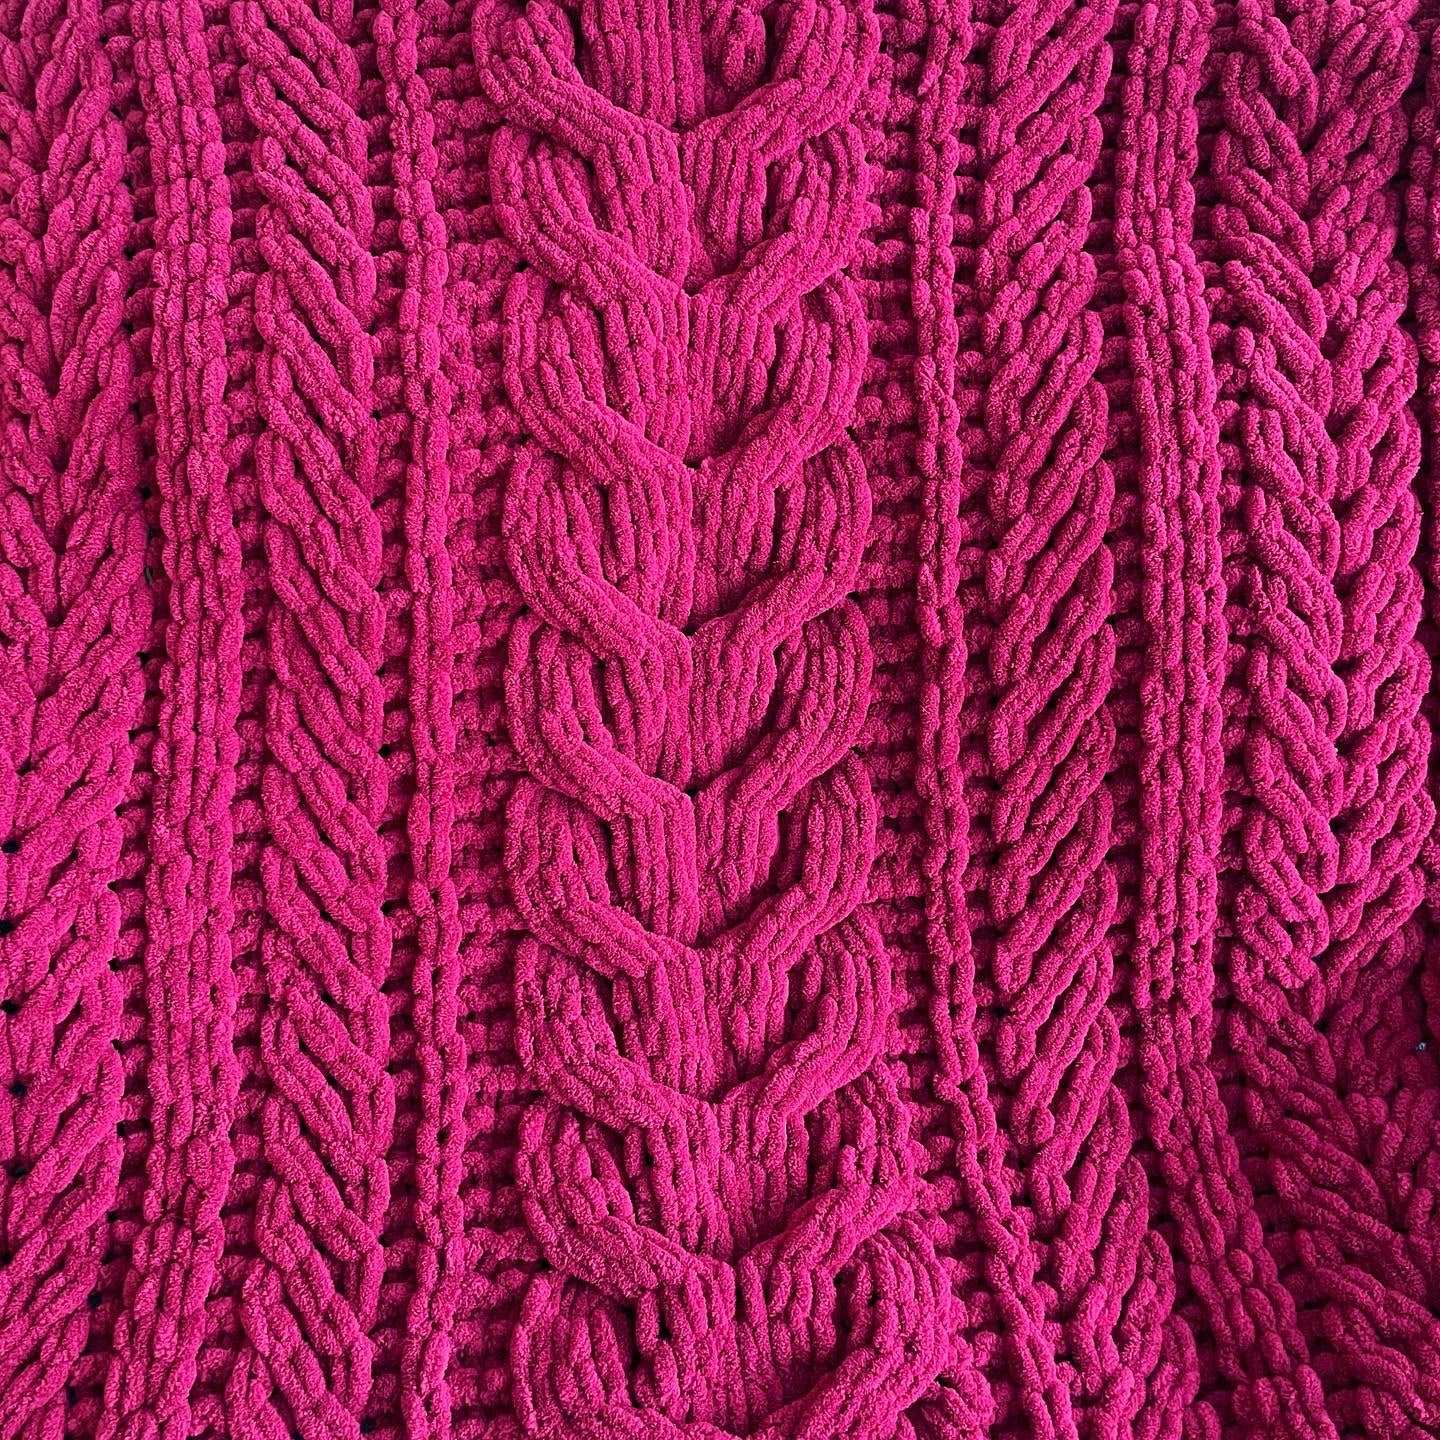 Extra-Chunky Staghorn Cable Blanket - ILoveMyBlanket